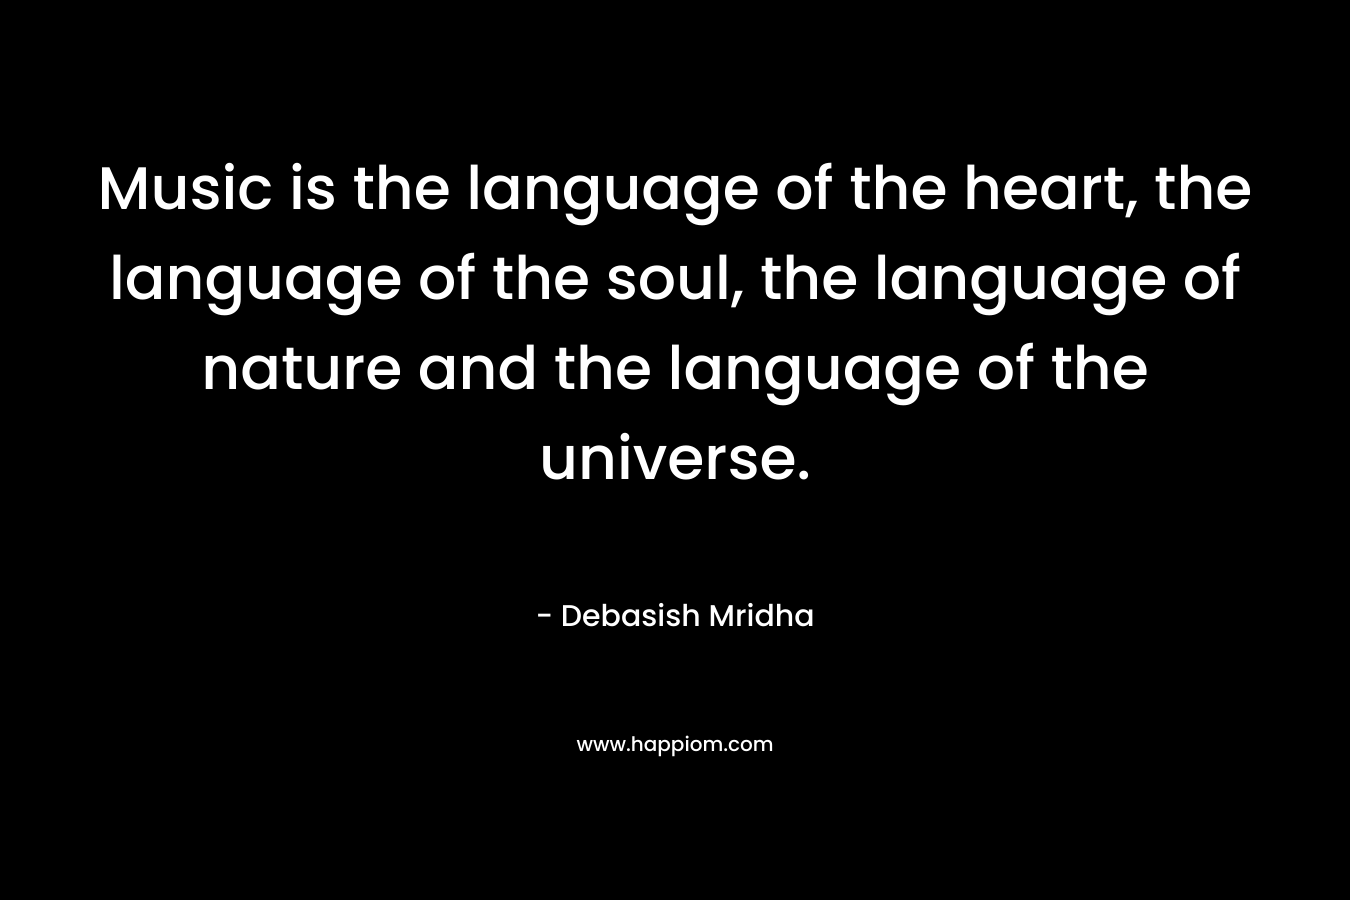 Music is the language of the heart, the language of the soul, the language of nature and the language of the universe.